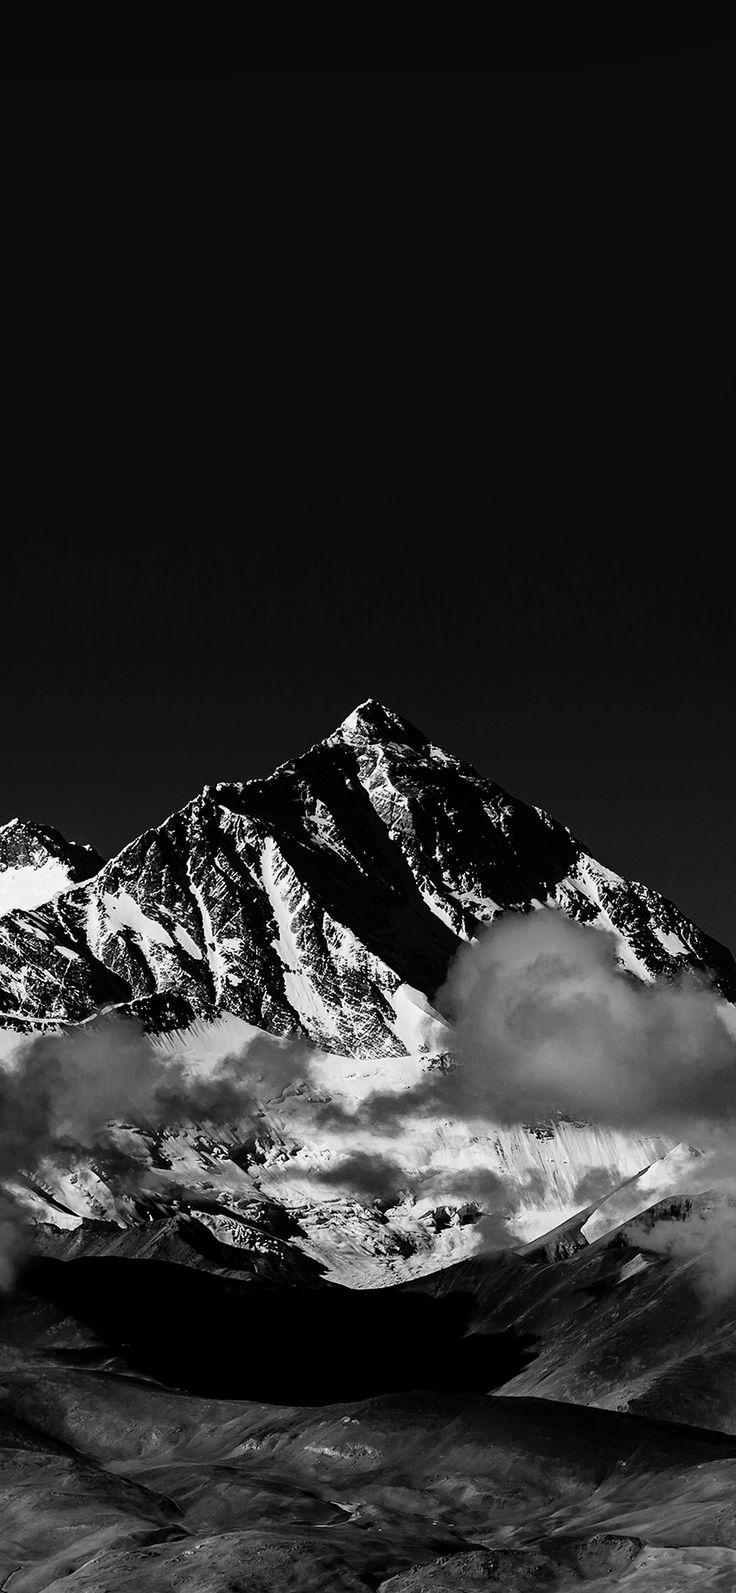 Black And White Iphone X Wallpaper Mountains - HD Wallpaper 